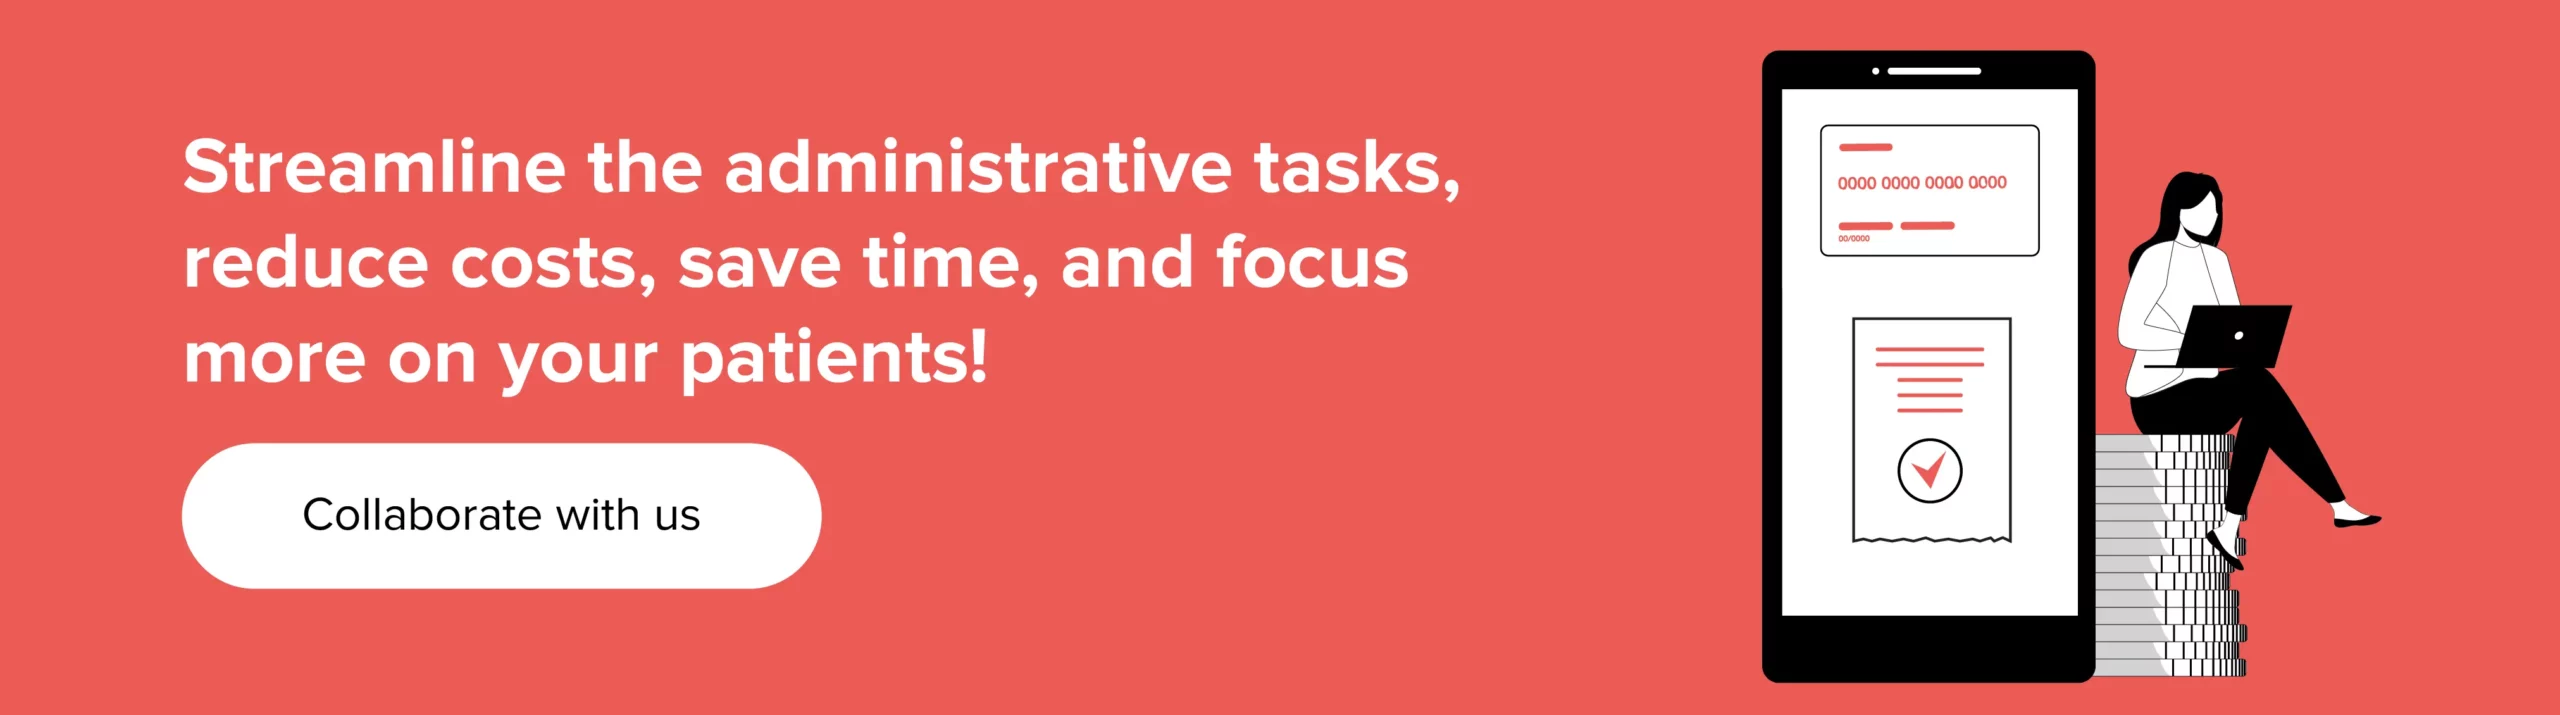 Streamline the administrative tasks and more